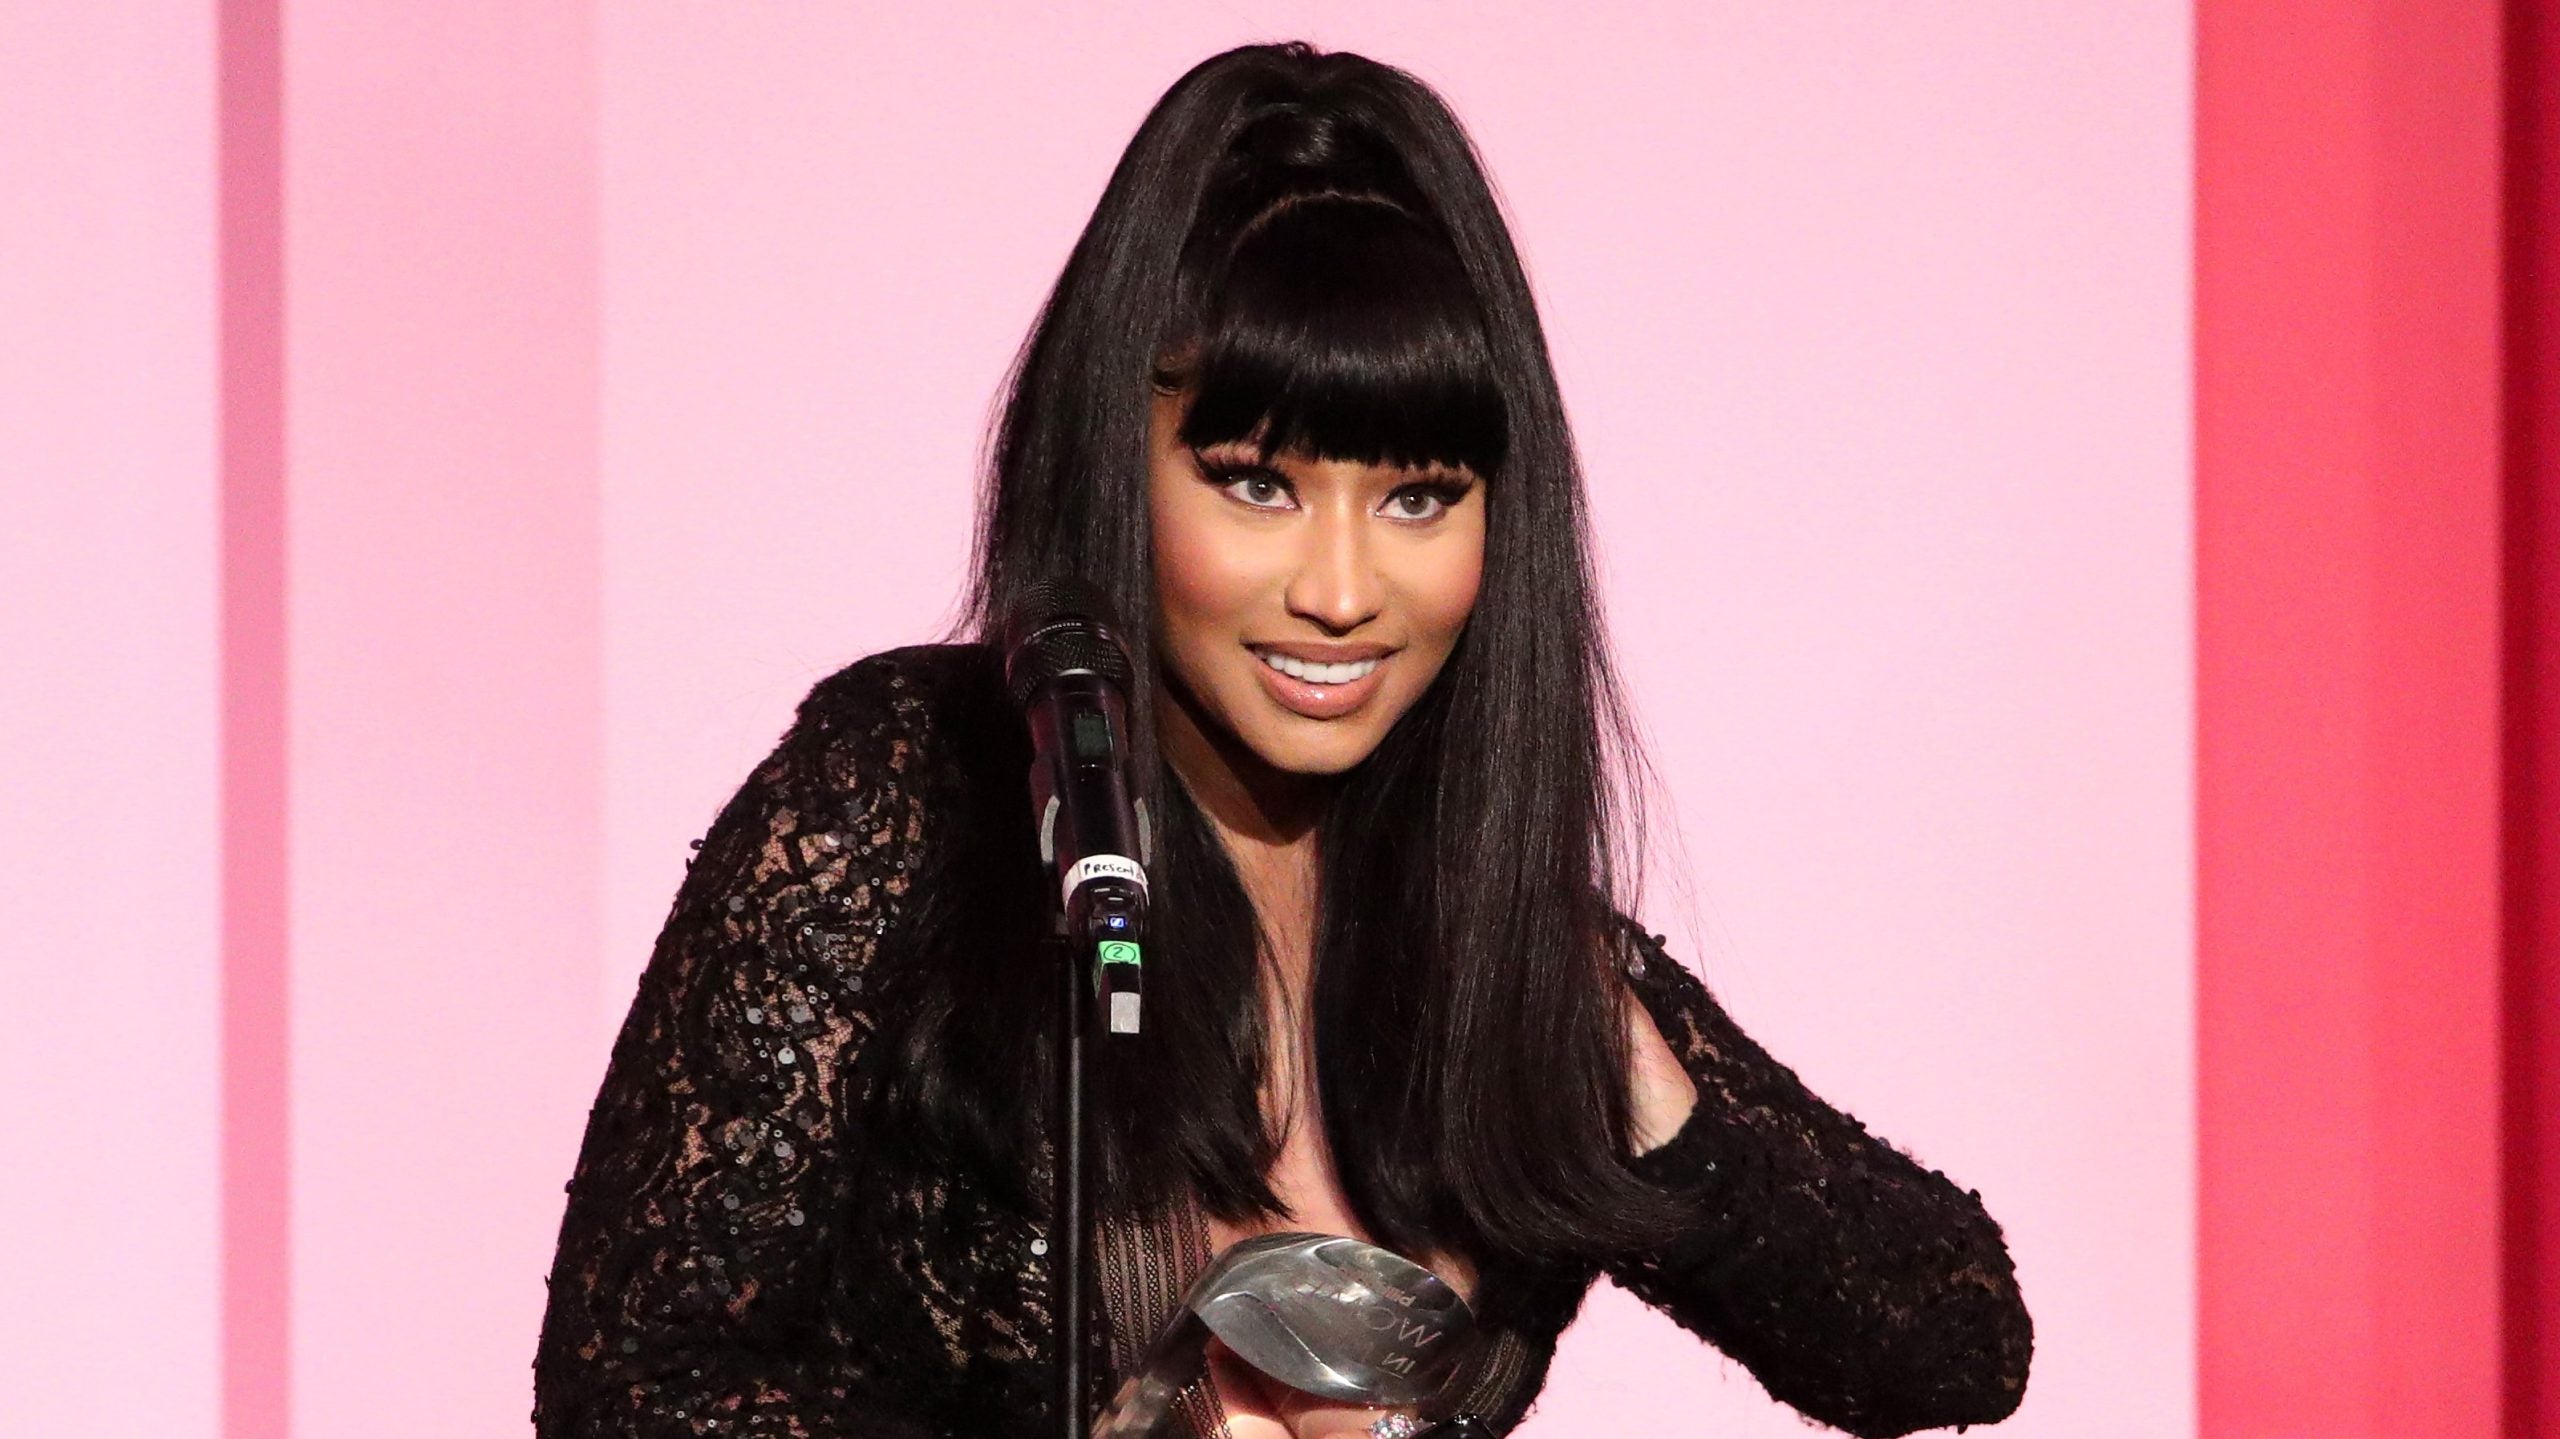 Nicki Minaj Is Starting Her Own Management Company And Record Label